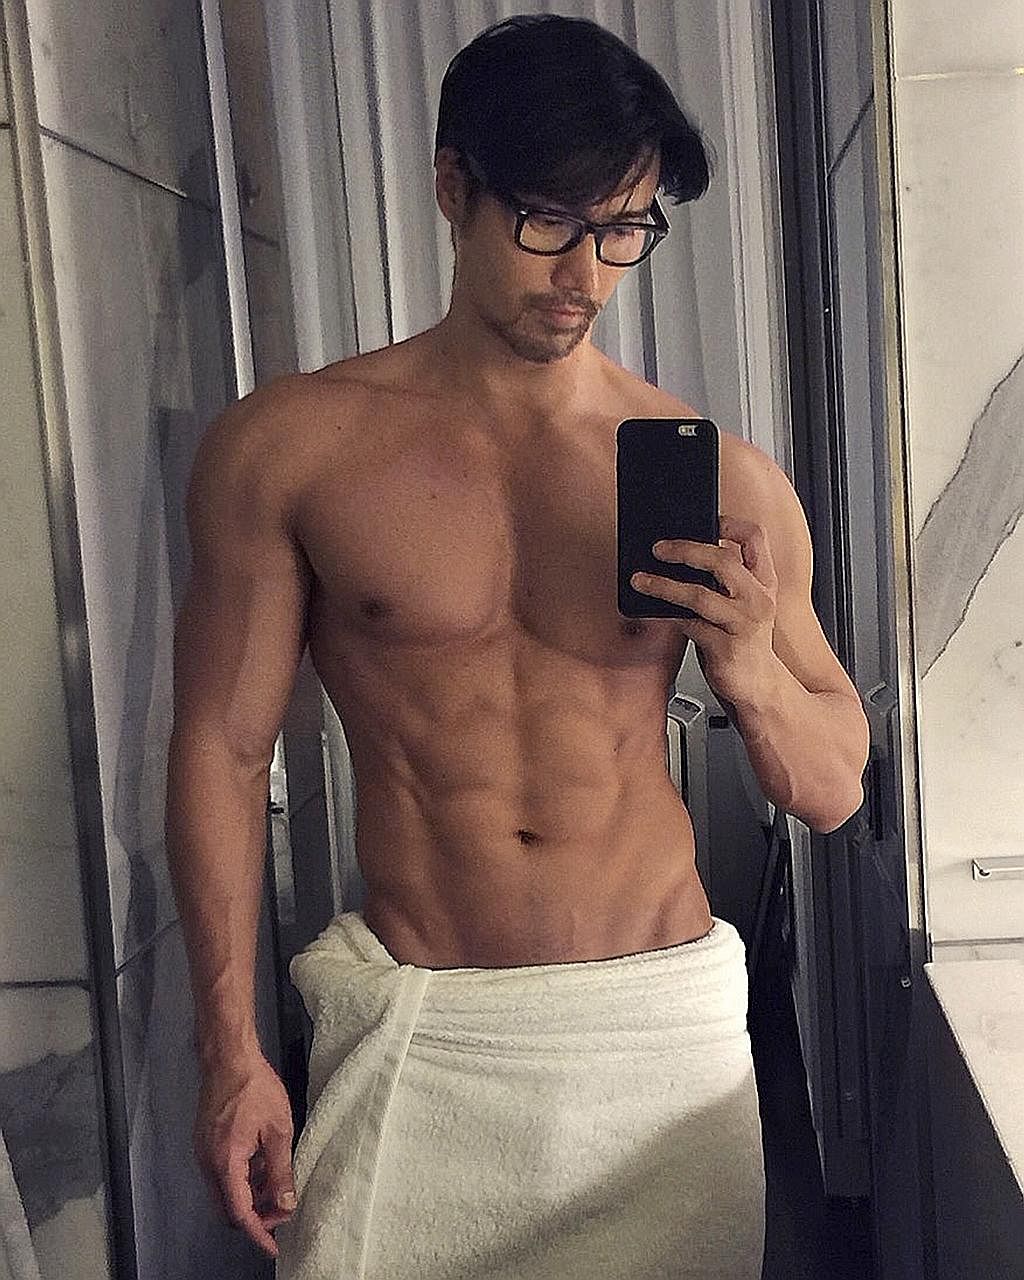 Tan has peppered his Instagram with holiday photos and about two dozen bare-bodied photos showing off his very impressive biceps and abs. He now has 424,000 followers.